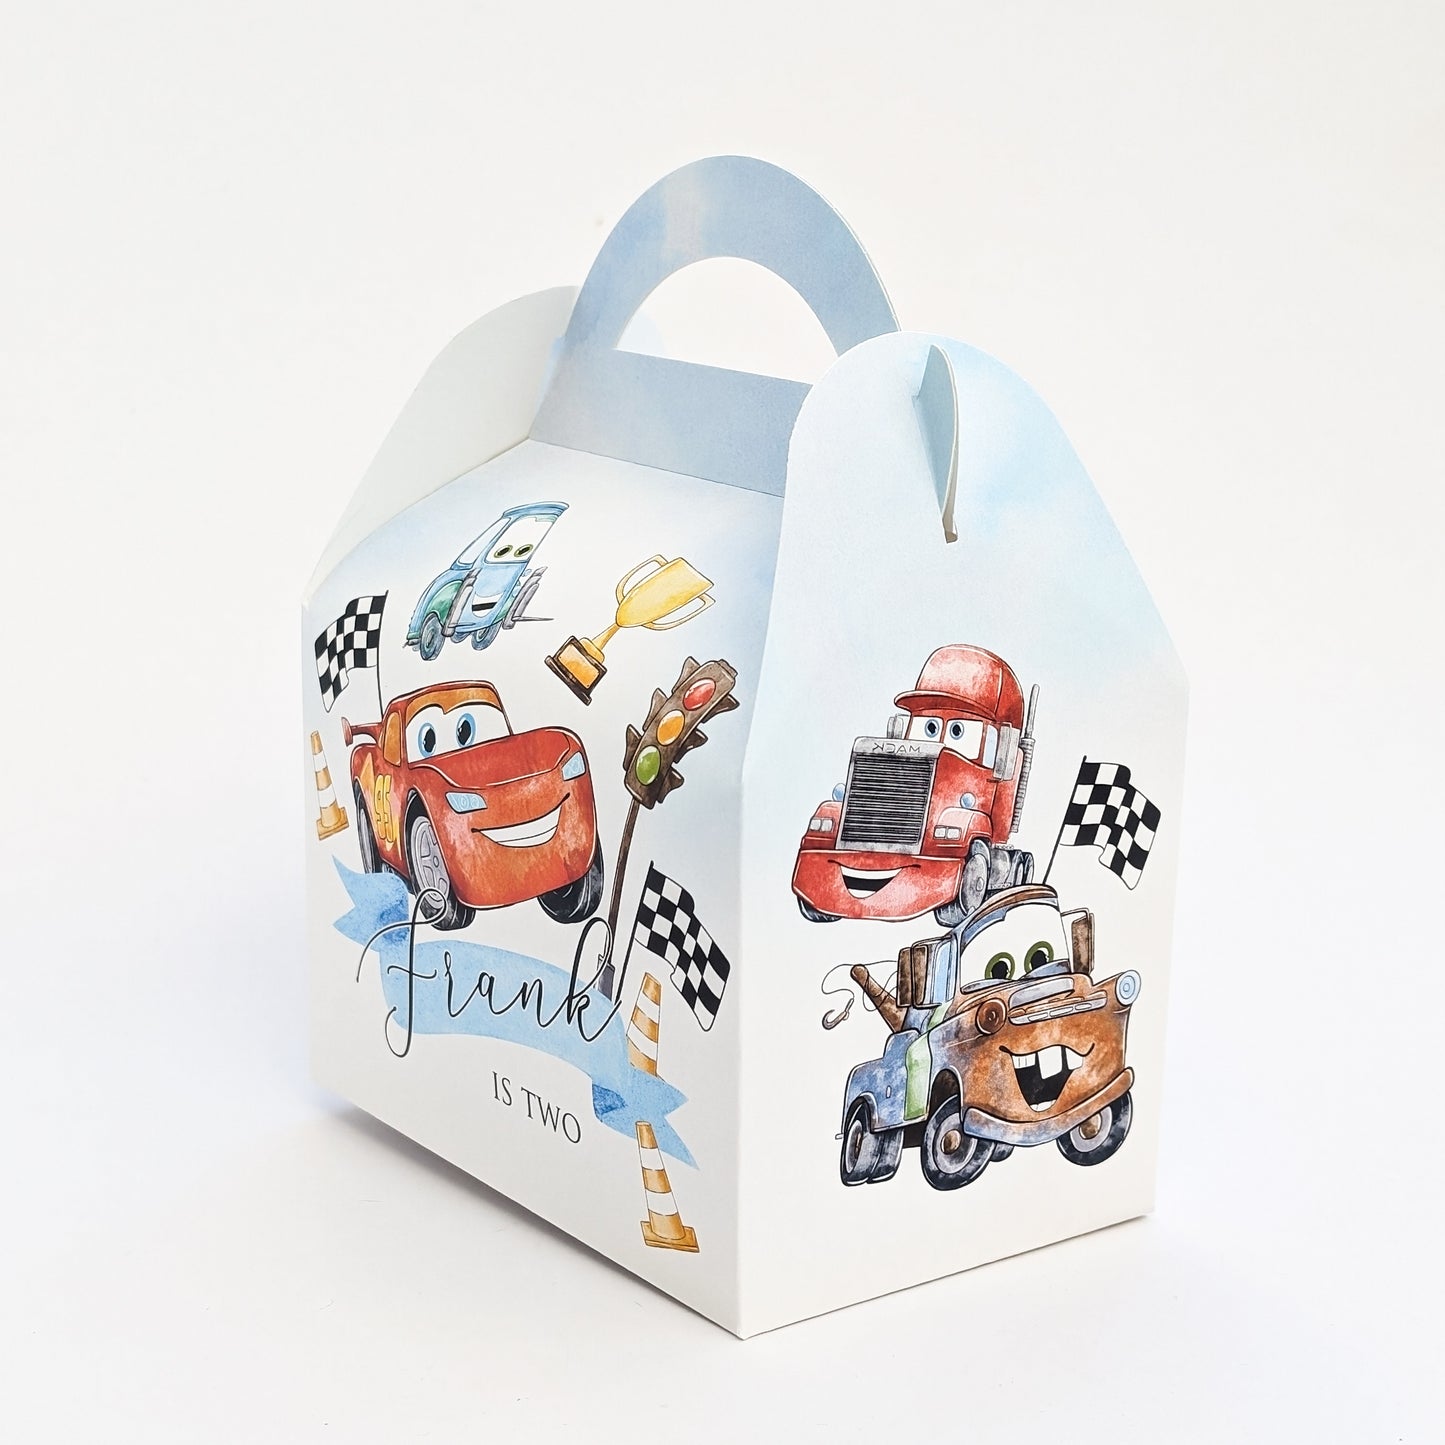 CARS Racing Lightening McQueen Personalised Children’s Party Boxes Gift Bag Favour